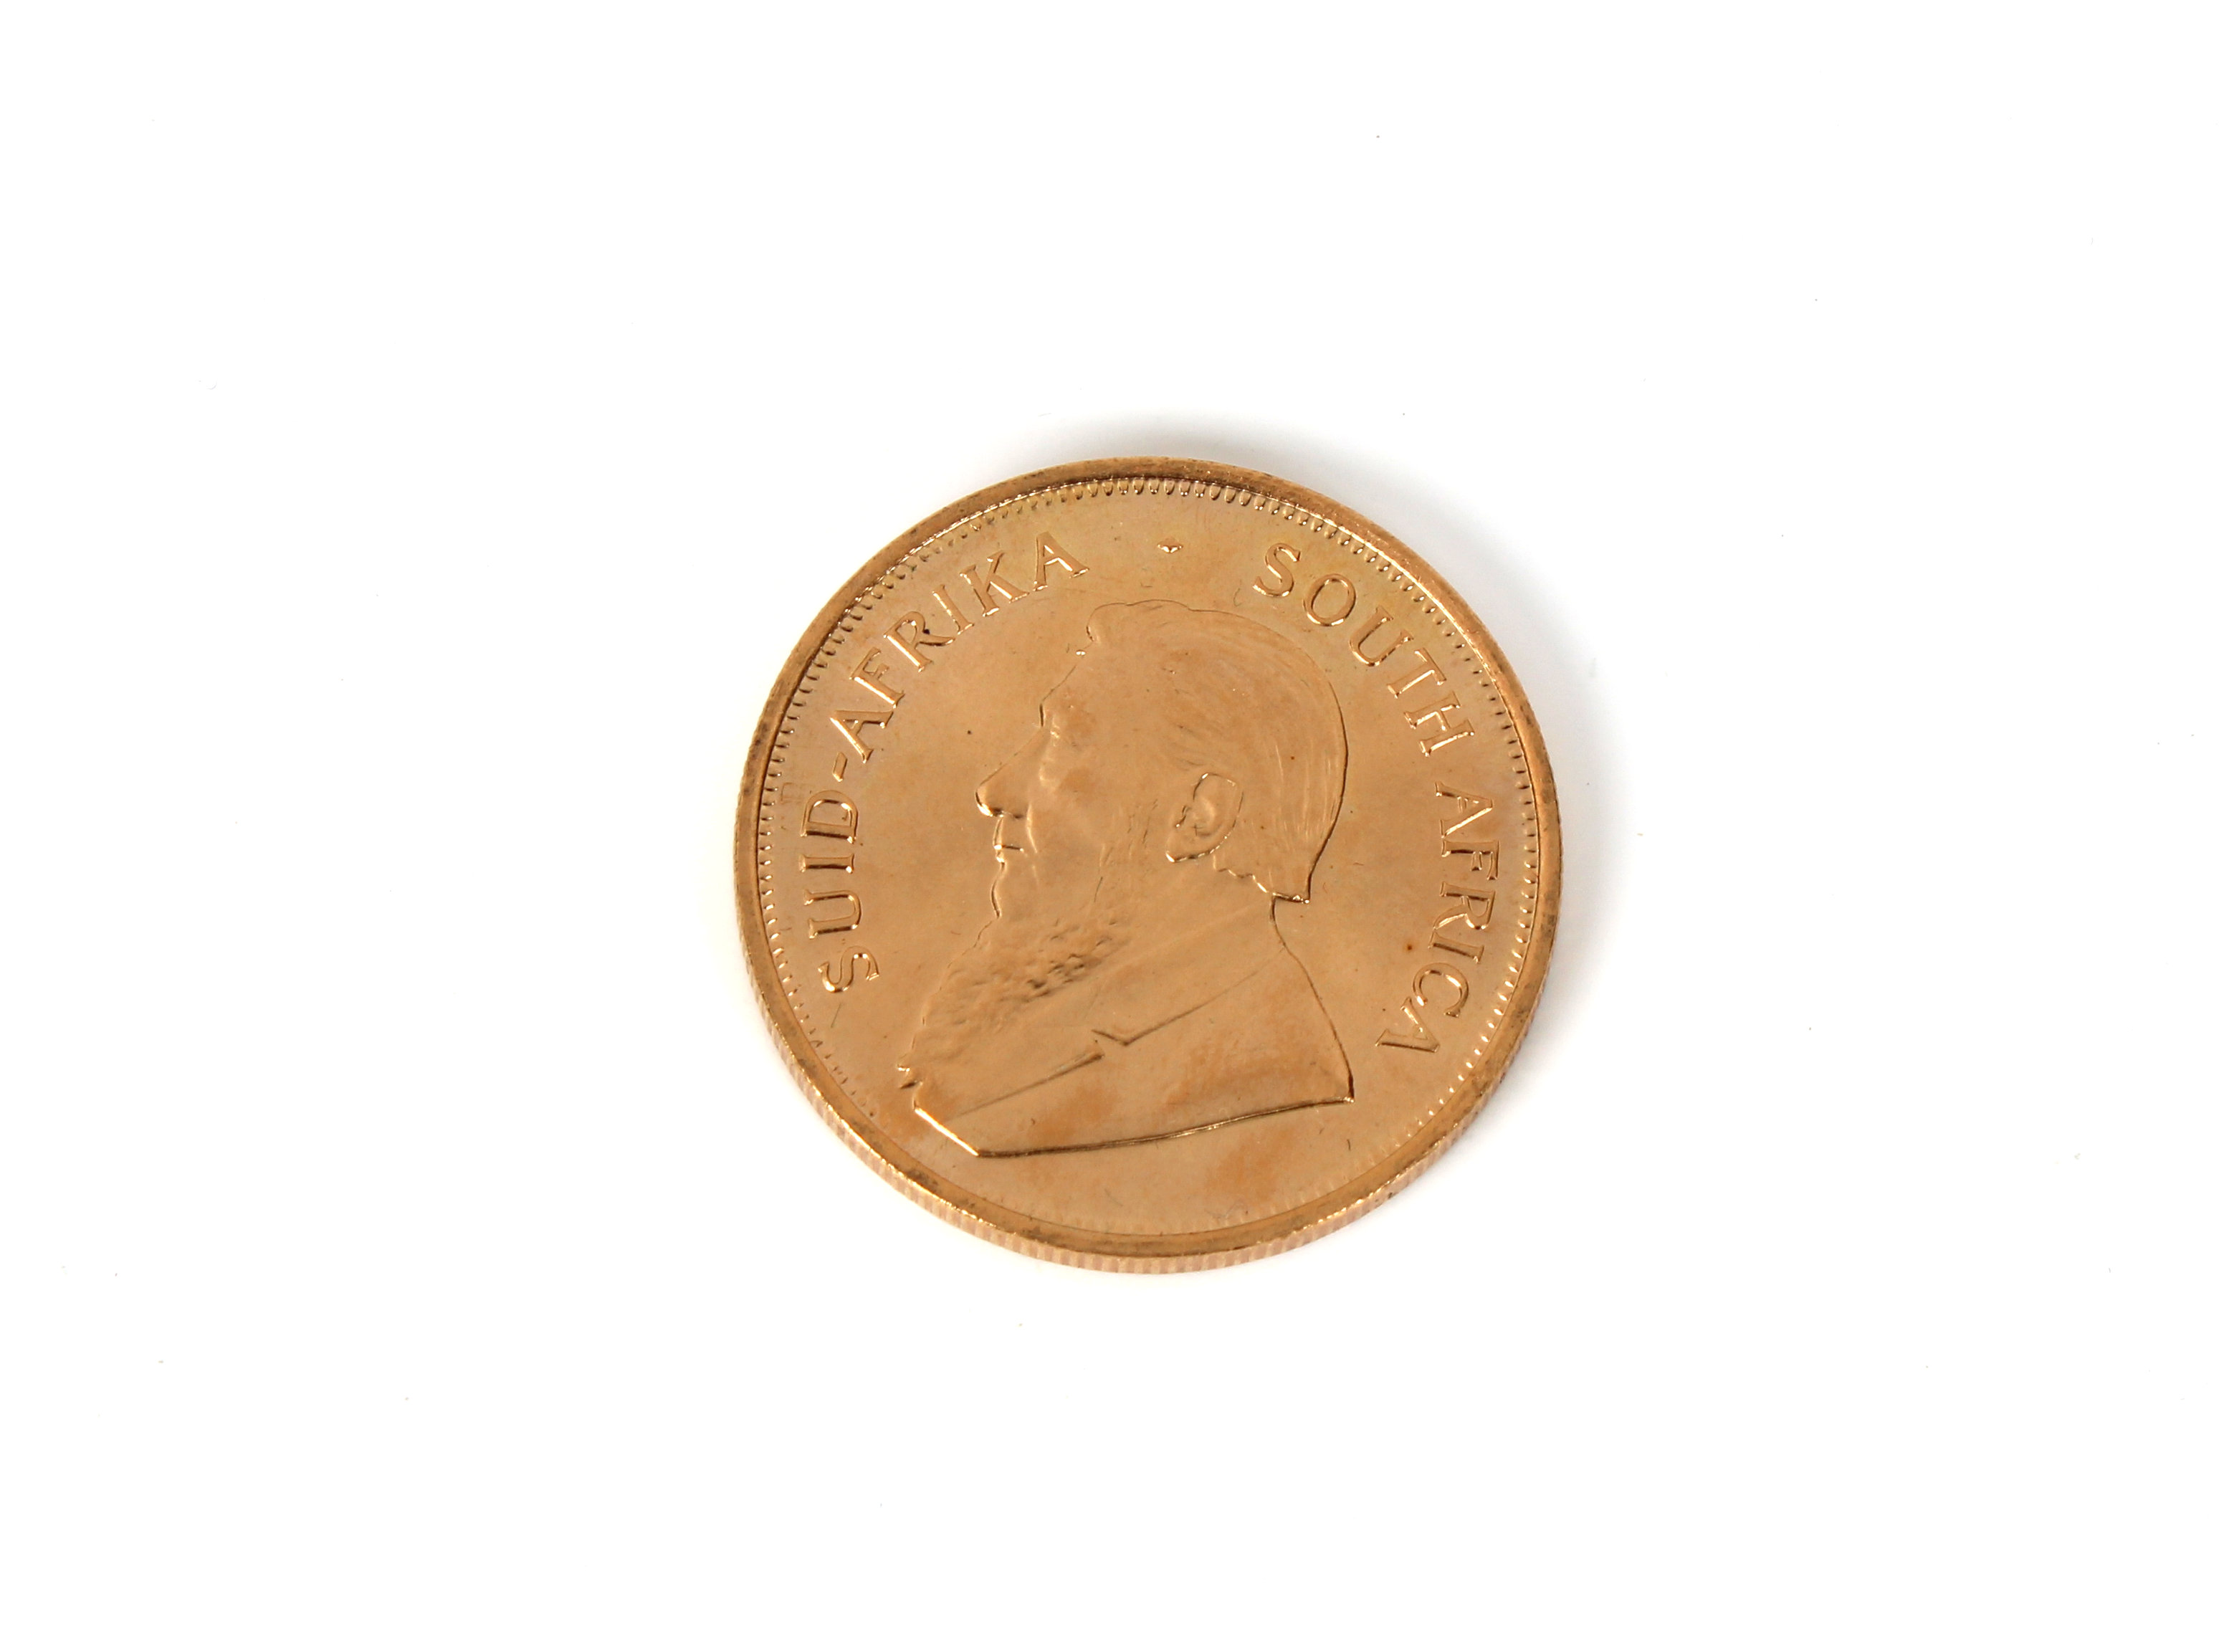 A South Africa 1980 Full 1oz fine gold Krugerrand coin. - Image 2 of 2